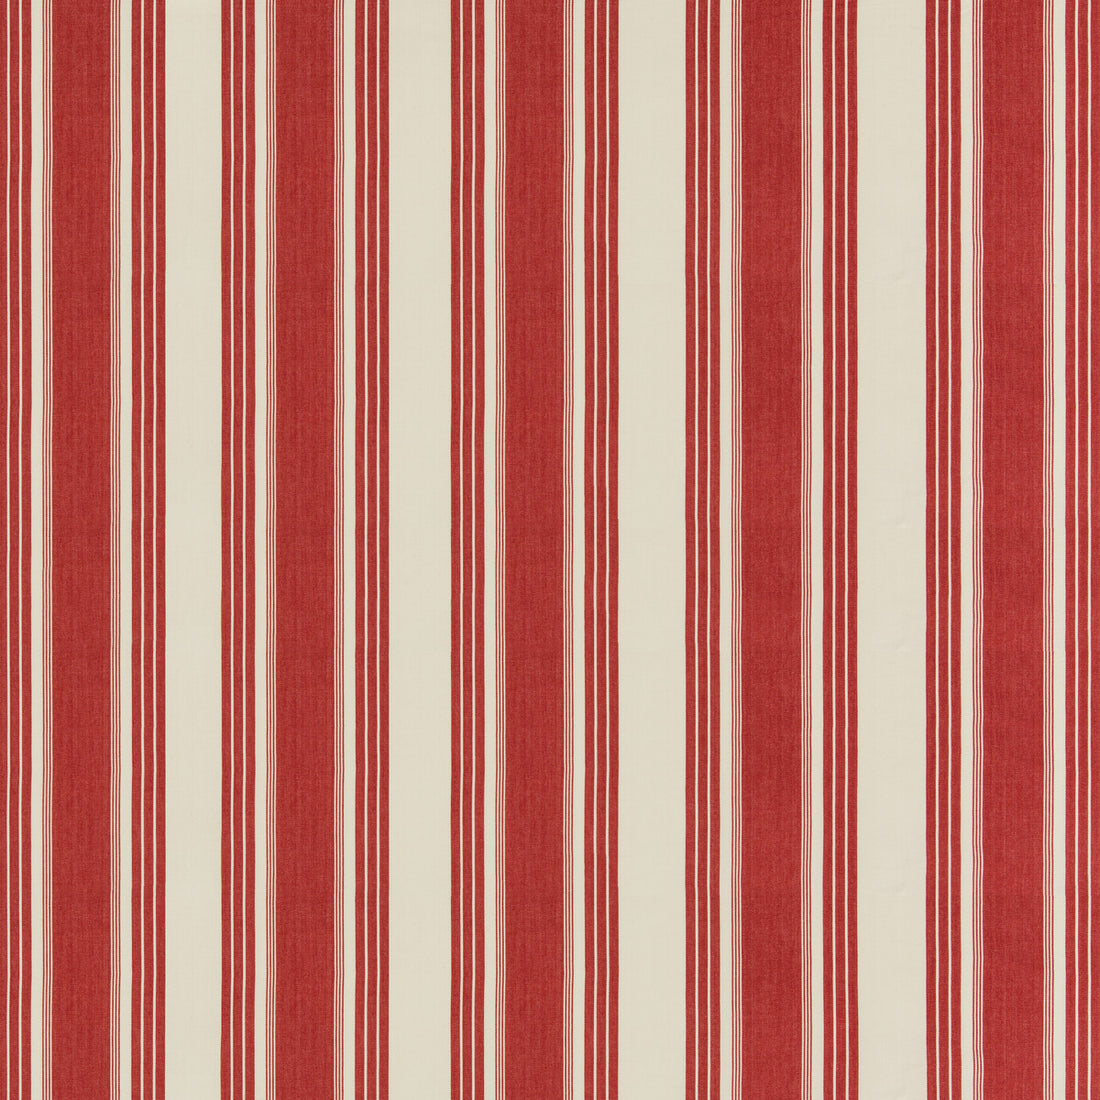 Colmar Stripe fabric in red color - pattern 8019110.19.0 - by Brunschwig &amp; Fils in the Folio Francais collection